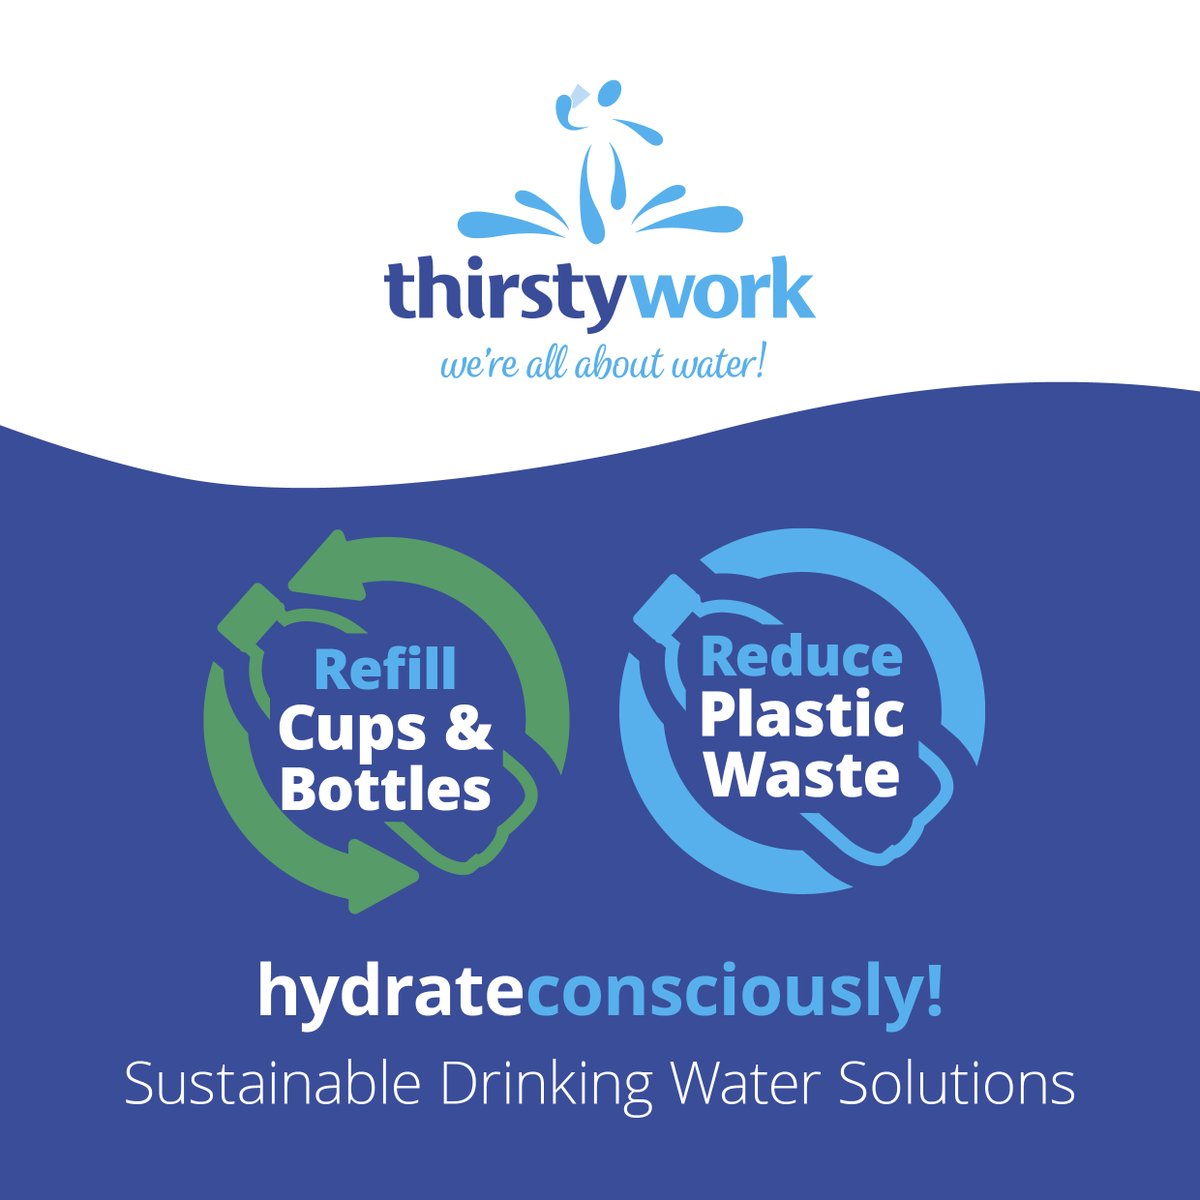 Our mission is to help businesses to stop using single-use plastic bottled water and reduce the impact that their drinking water has on the planet by refilling bottles and cups.

#reduceplasticwaste #hydrateconsciously #reduce #reuse #hospitality #hydration